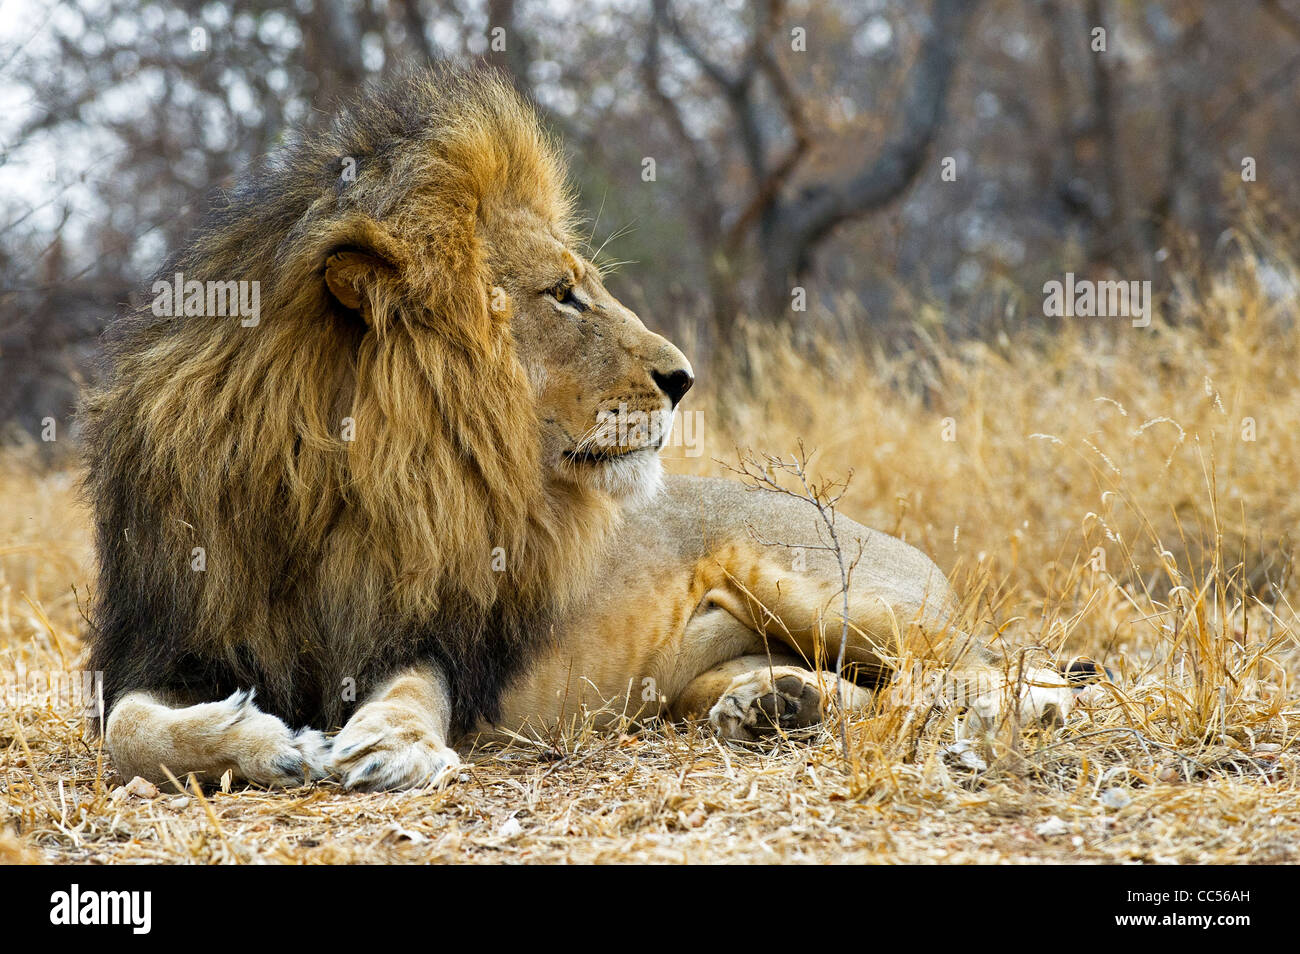 Lion at rest Stock Photo